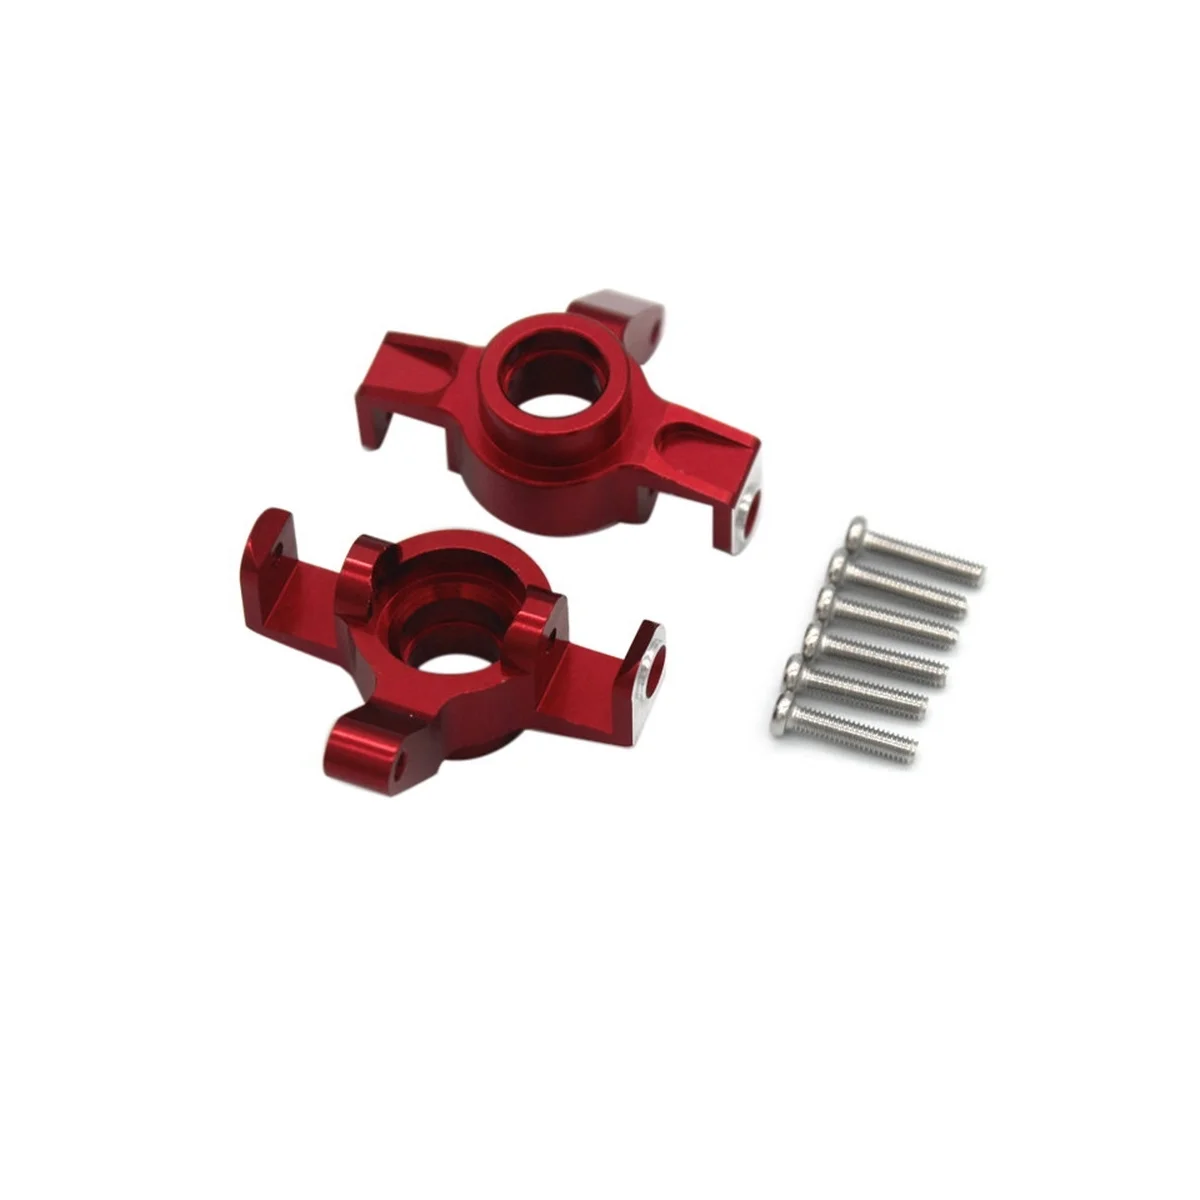 

Metal Steering Cup Steering Block for MJX Hyper Go 14301 14302 1/14 RC Car Upgrades Parts Accessories, Red